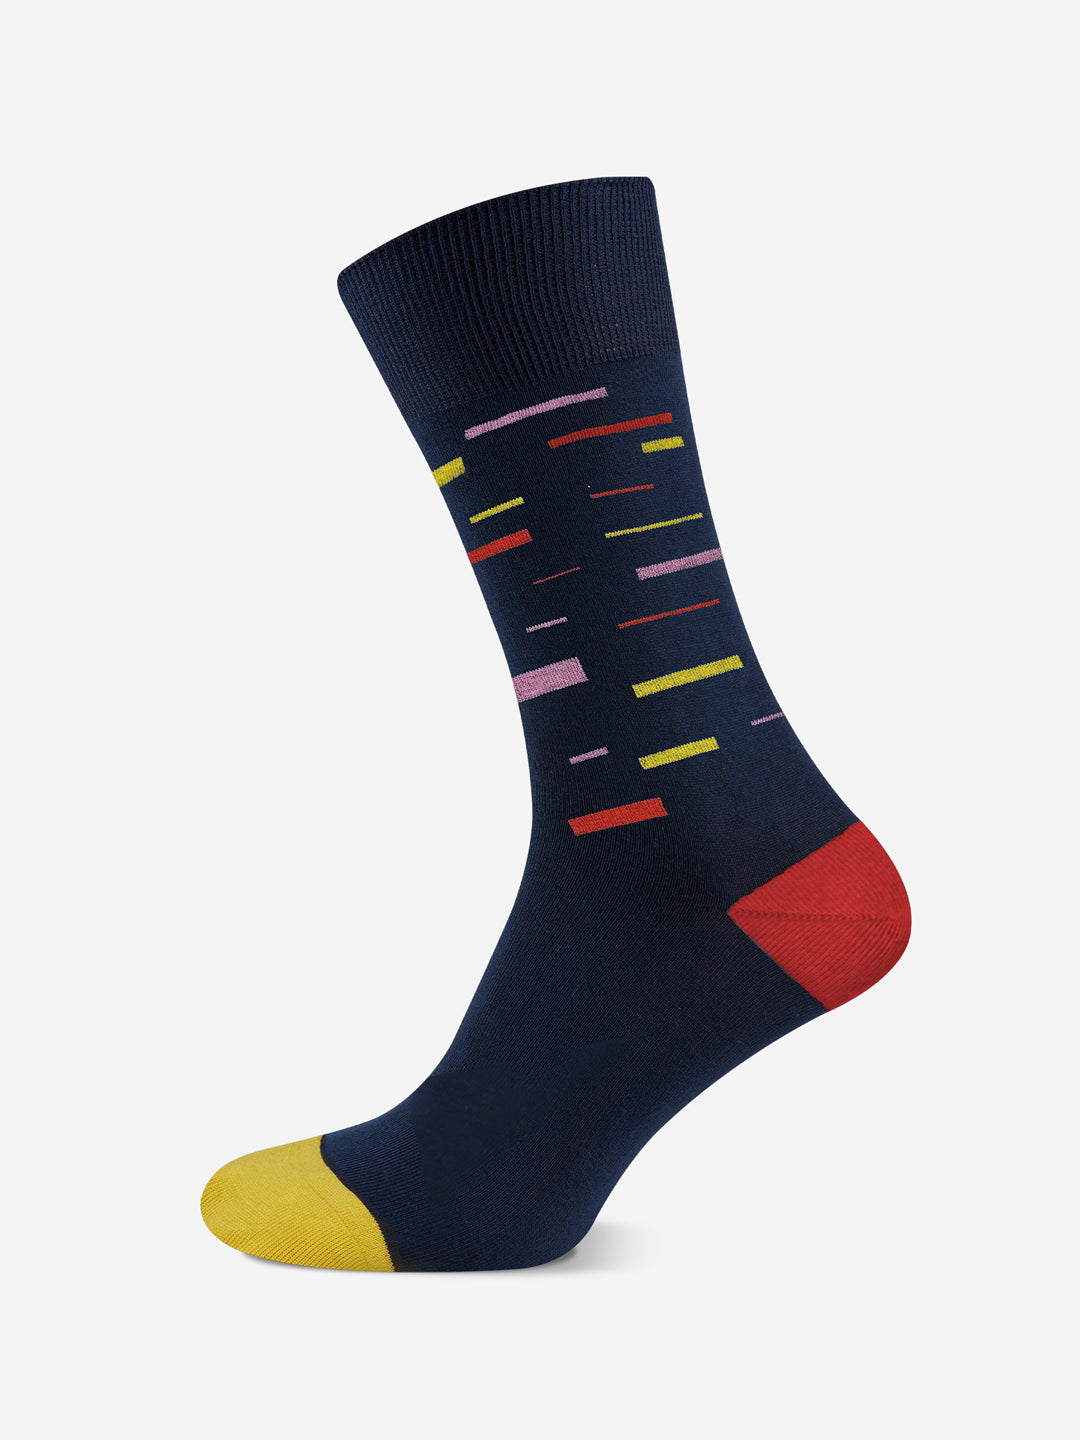 Grand Tours - Speed - Casual Socks